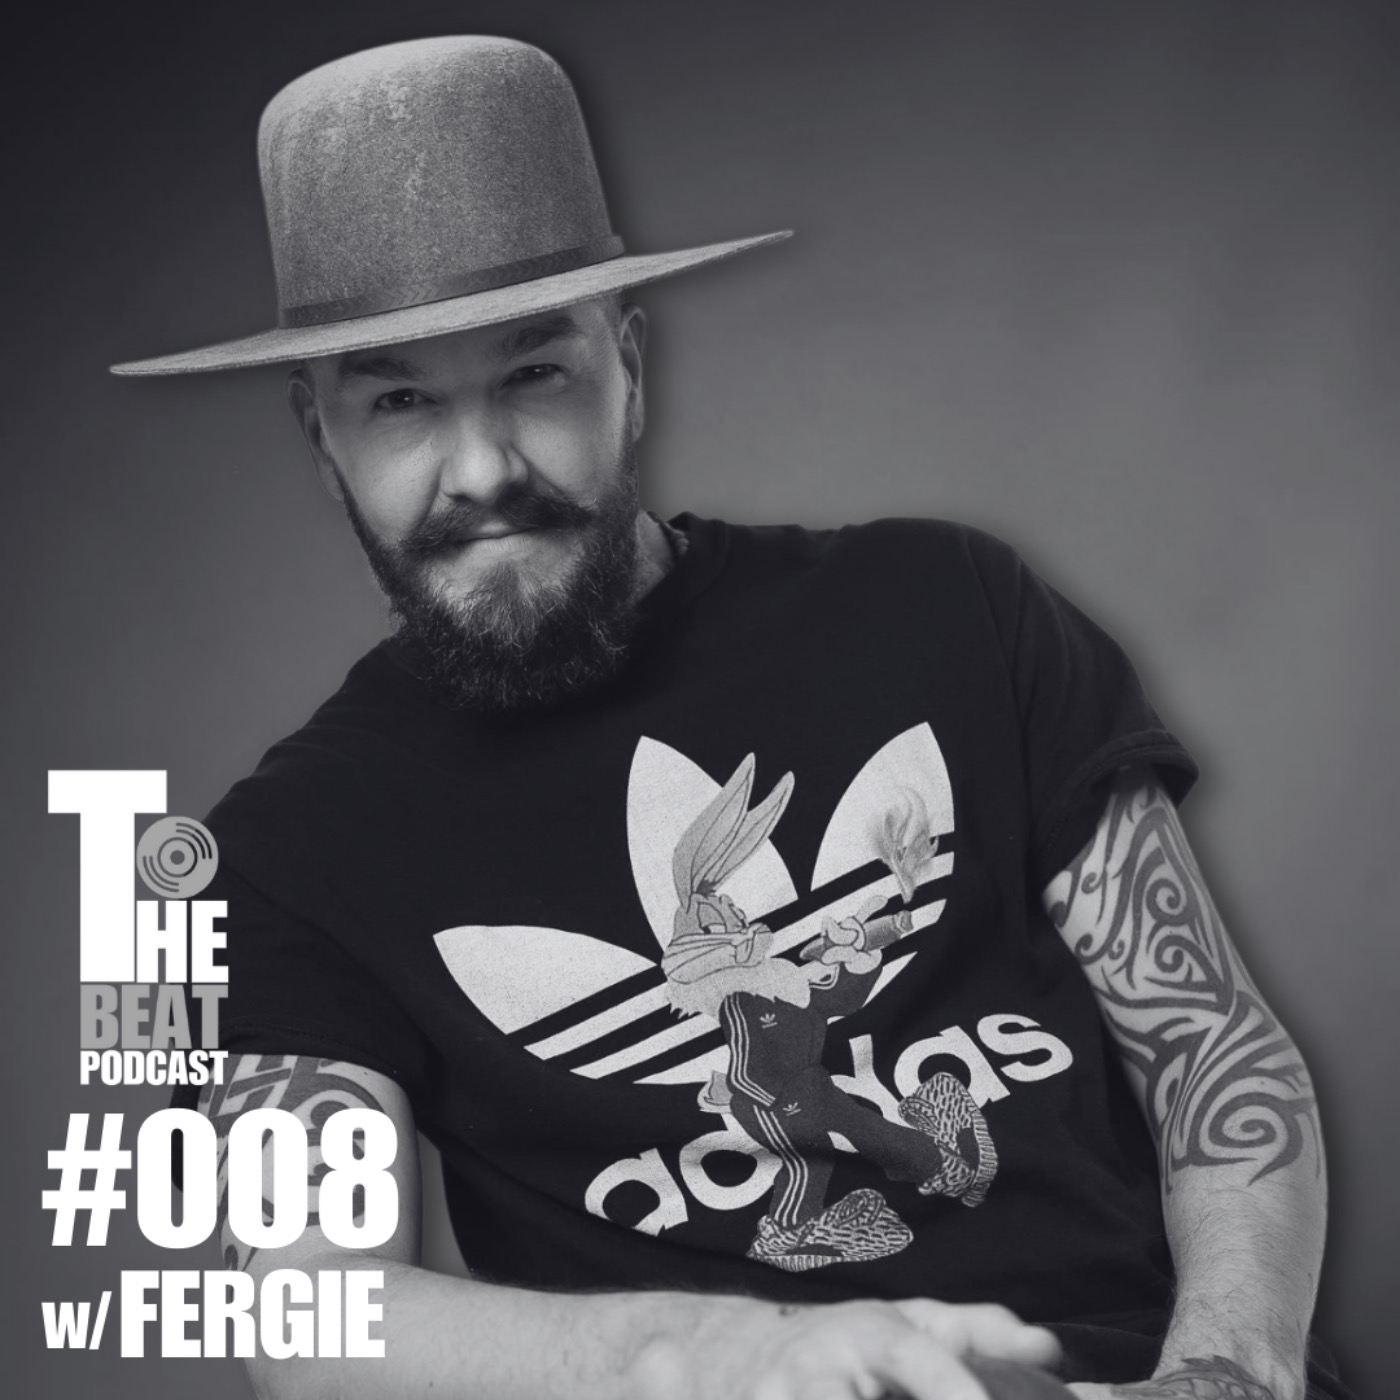 #008 w/ Fergie | From being in nightclubs at the age of 13, to becoming a superstar DJ